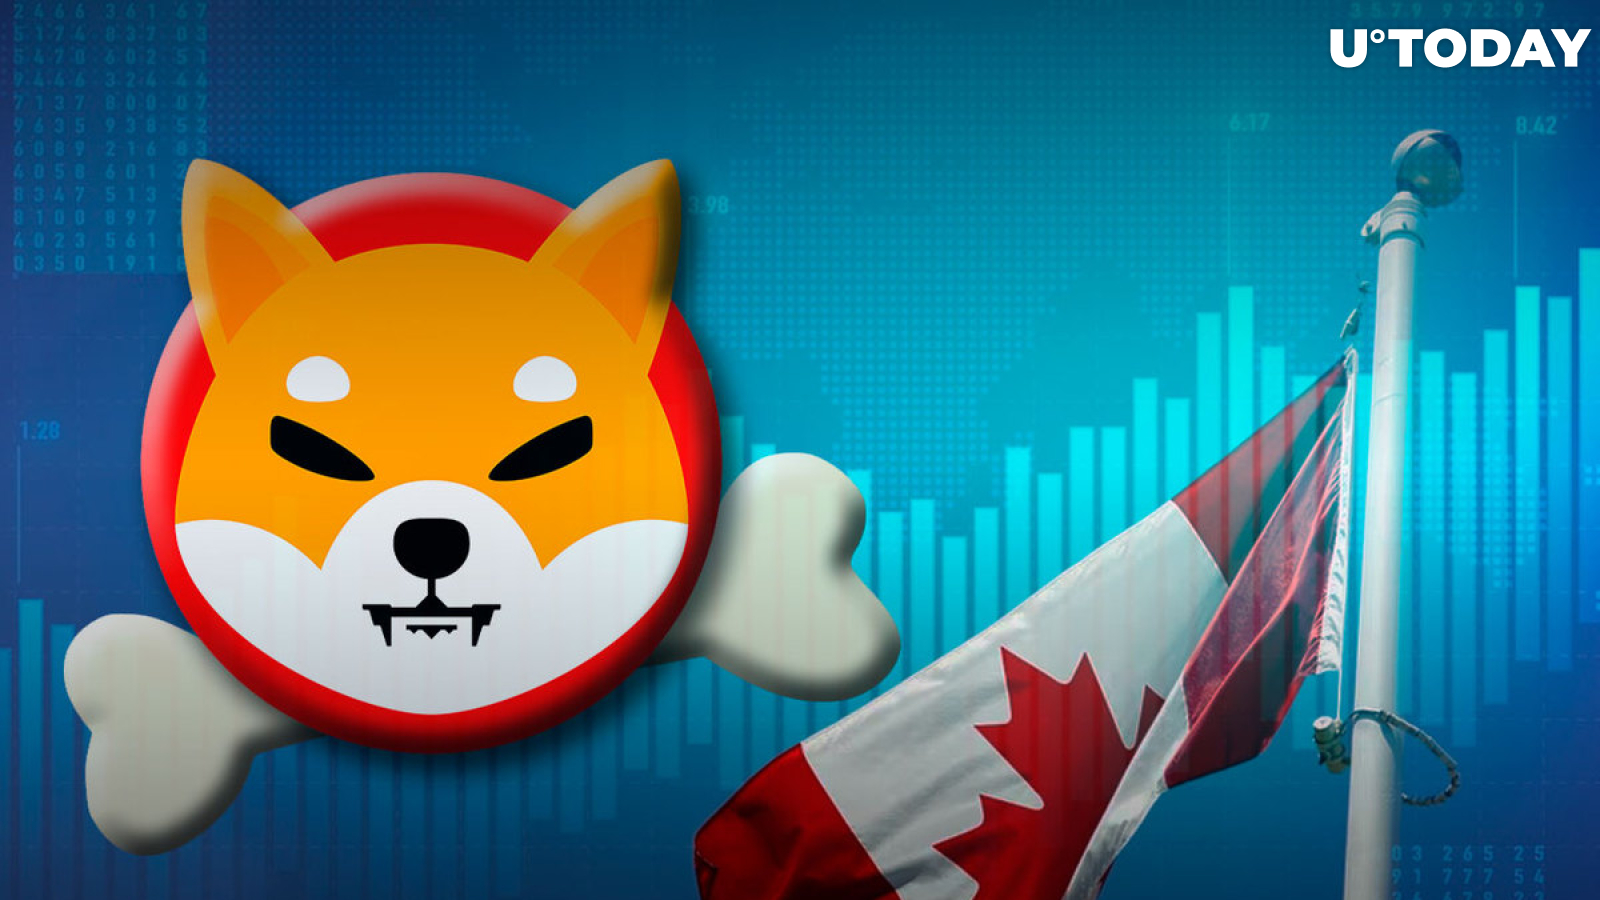 Shiba Inu's BONE Trading Volume Hit 83% Within 24 Hours of Listing on Canadian Exchange